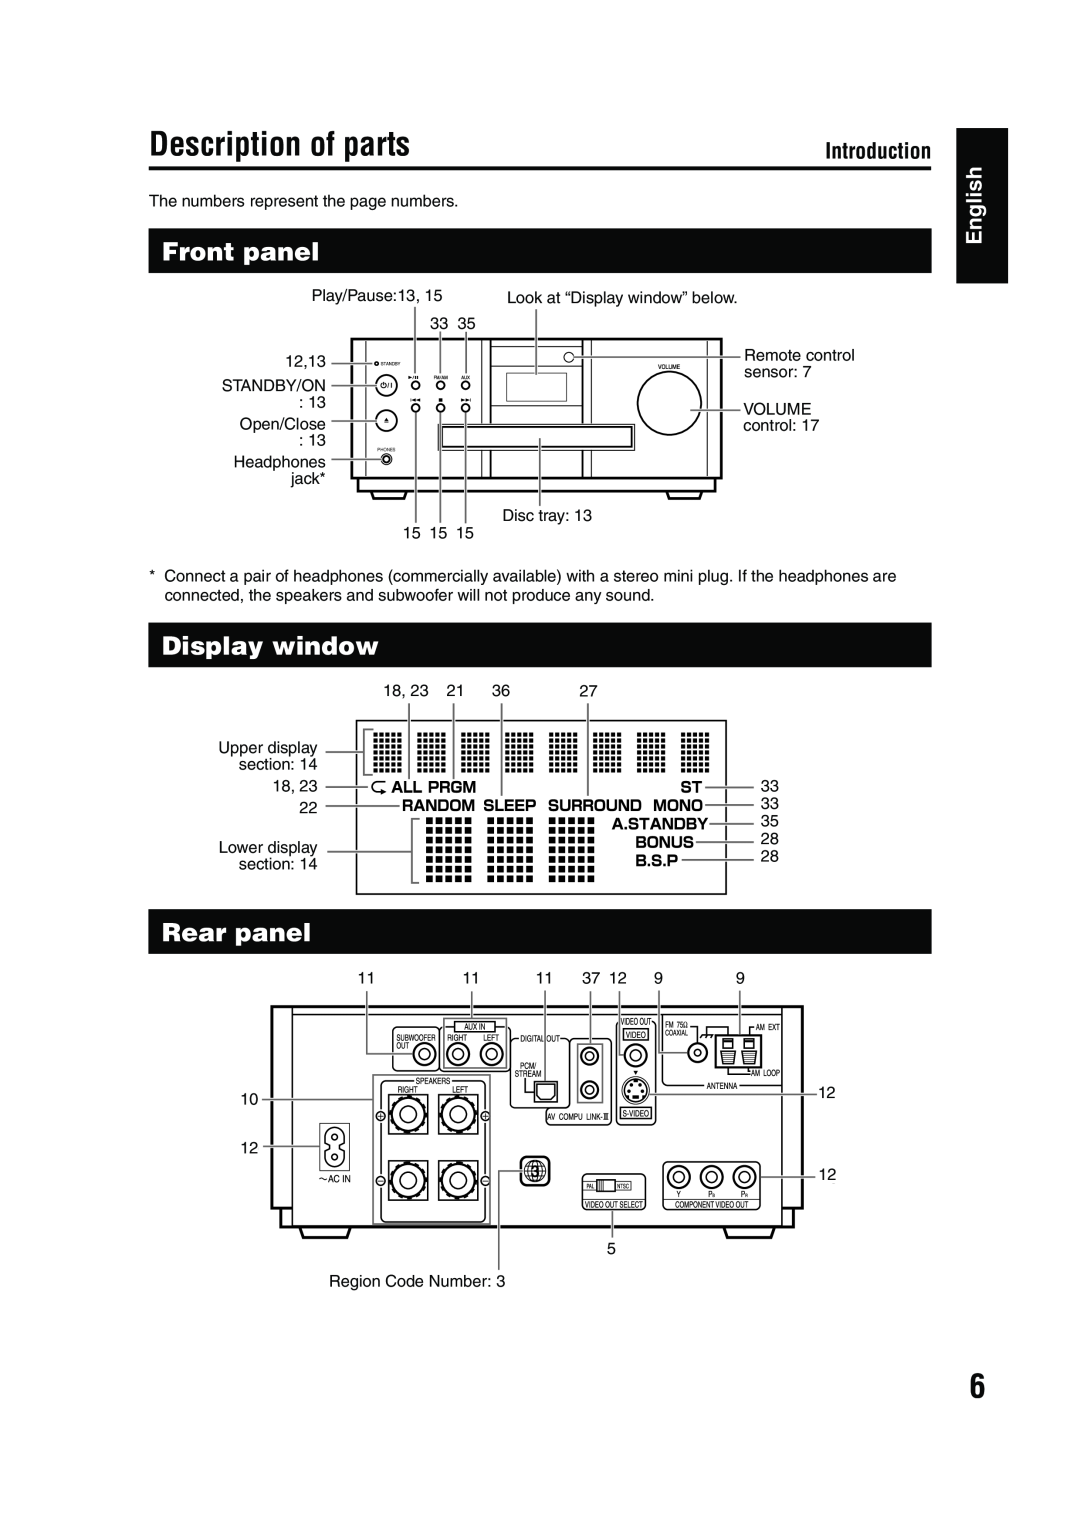 JVC EX-A5 manual Description of parts, Front panel, Display window, Rear panel, English, Introduction 